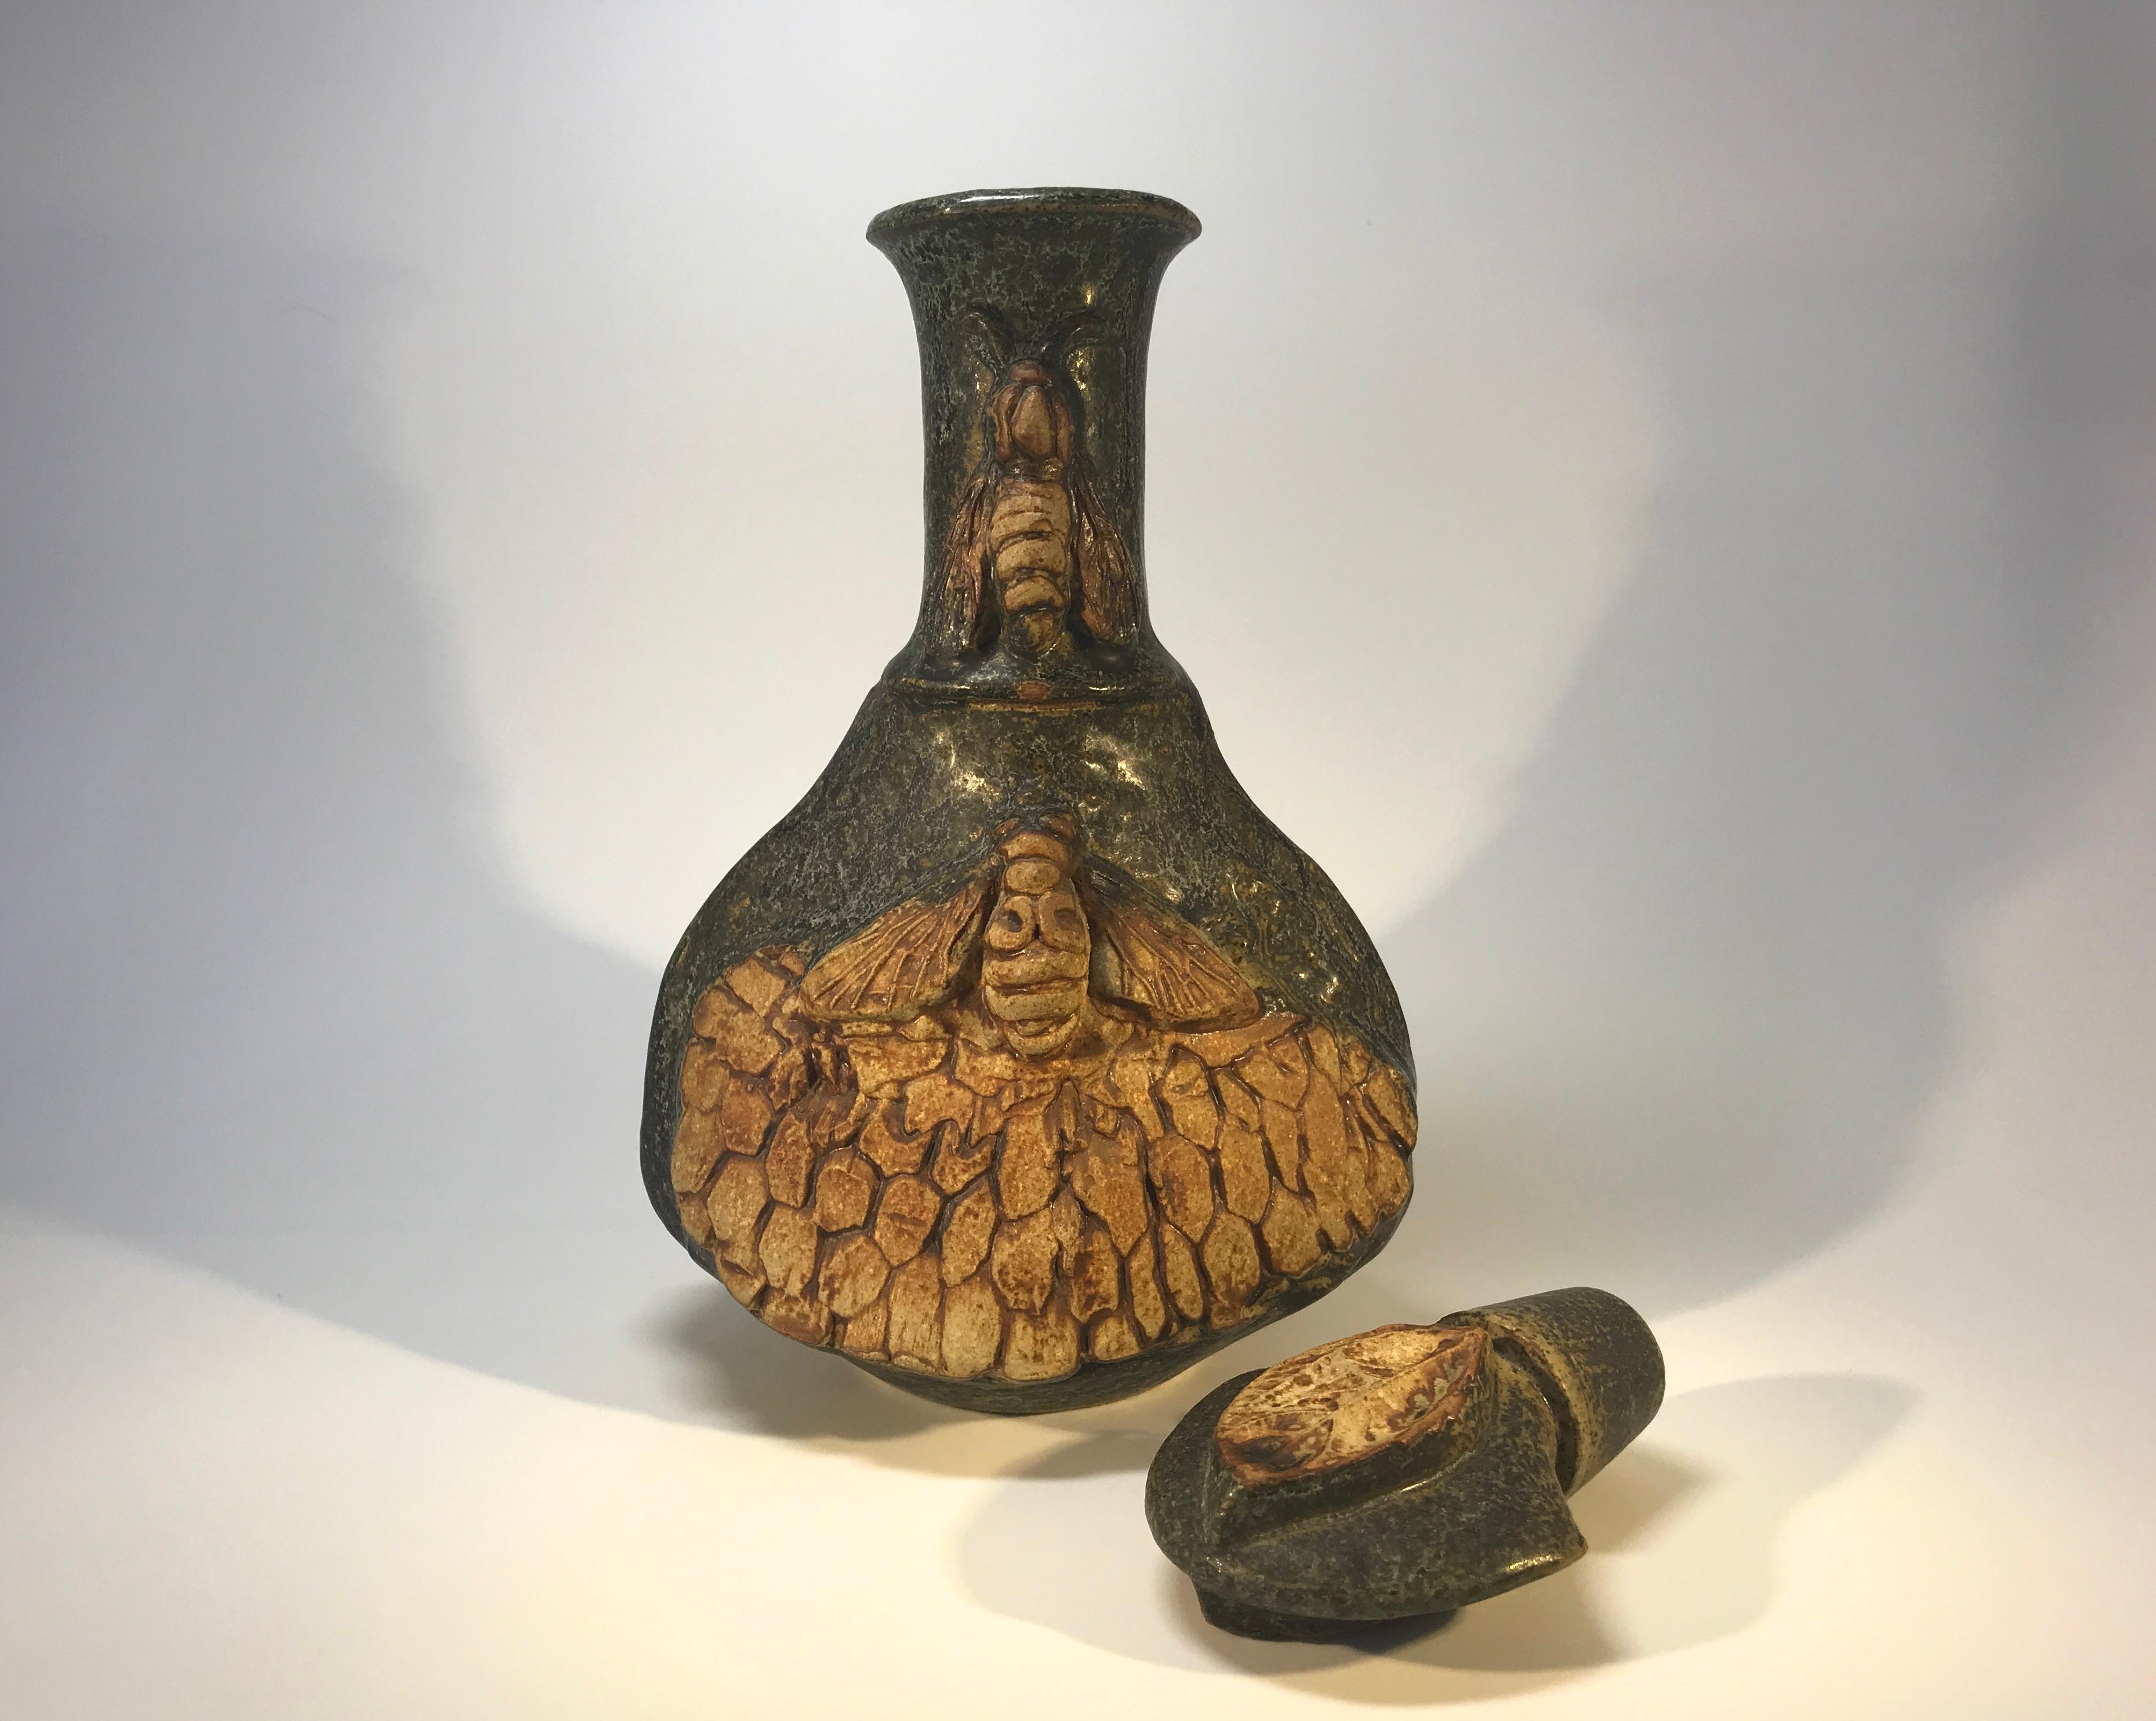 Hand formed by Bernard Rooke of England, stoneware decanter decorated with hand formed honeycomb and bees to both front and back
A super example of Rooke's creativeness and a worthy collectors piece
Signed BR
Measures: Height including stopper